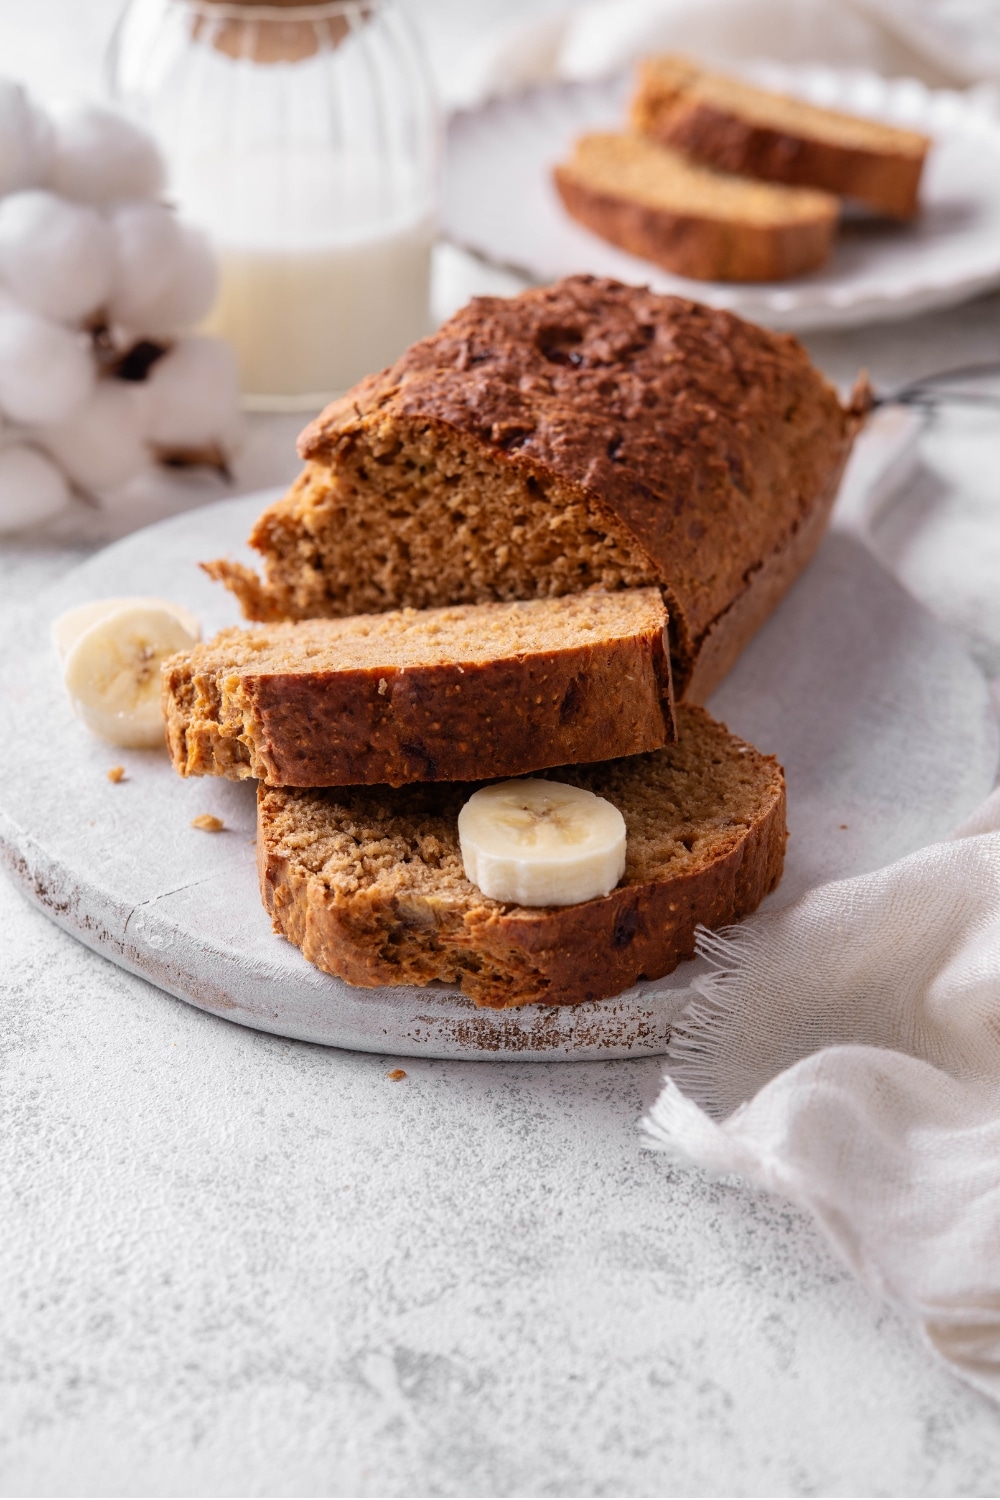 A low calorie banana bread loaf and two slices of banana bread sit on a white serving board. There is a piece of banana in between the two slices, and additional pieces of banana on the board.